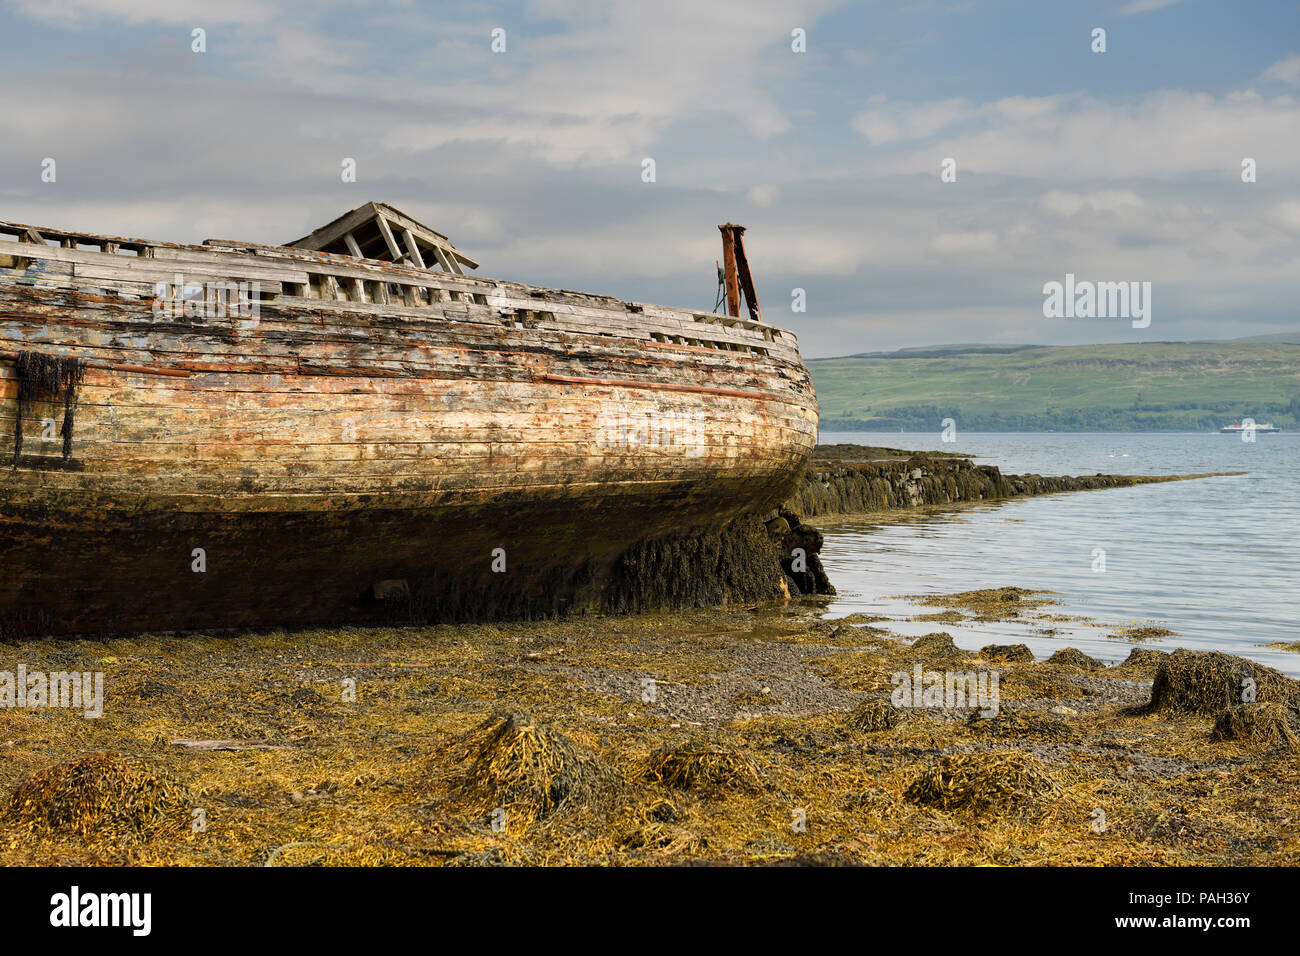 Shipwreck on Salen beach with seaweed at low tide on Sound of Mull Isle of Mull Scotland UK Stock Photo